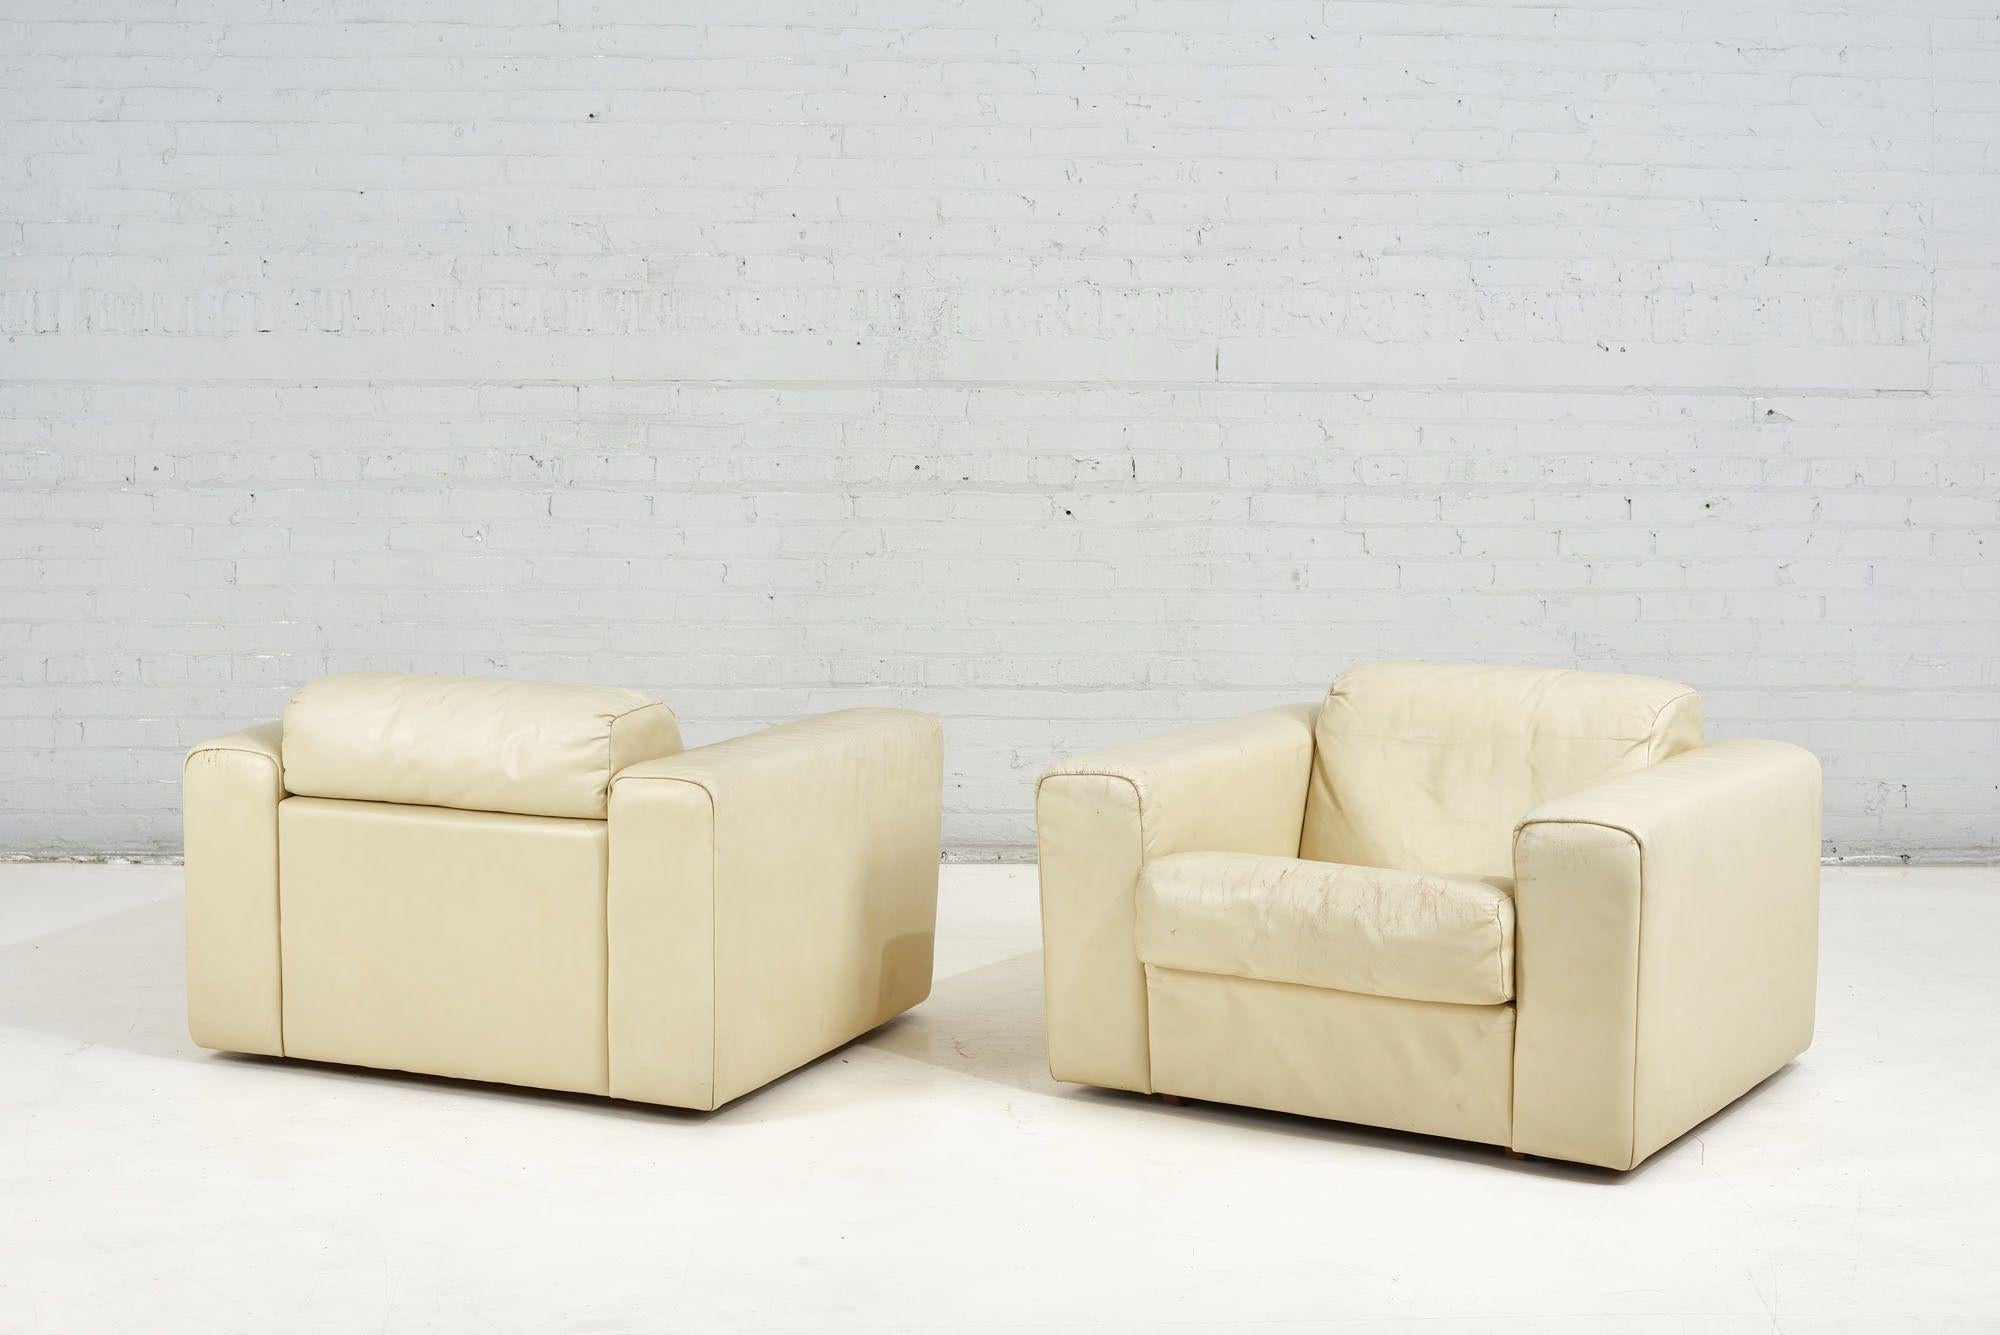 Baron Lounge Chairs by Robert Haussmann for Stendig, Cream Leather, 1970 In Good Condition For Sale In Chicago, IL